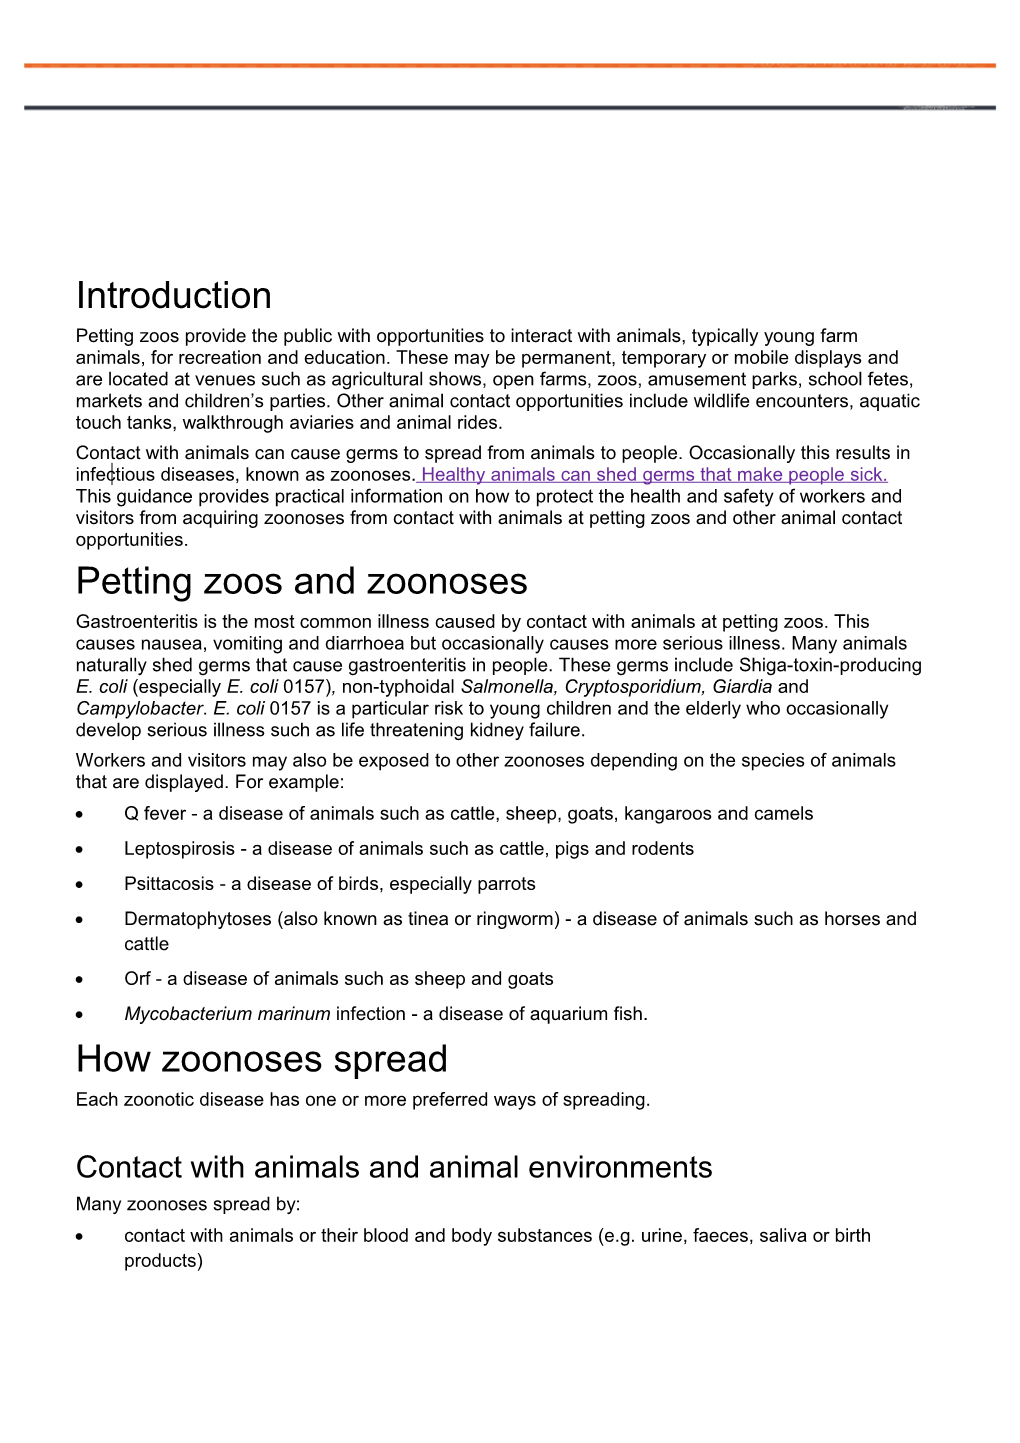 Guidance on Managing Infection from Petting Zoos and Other Animal Contact Opportunities